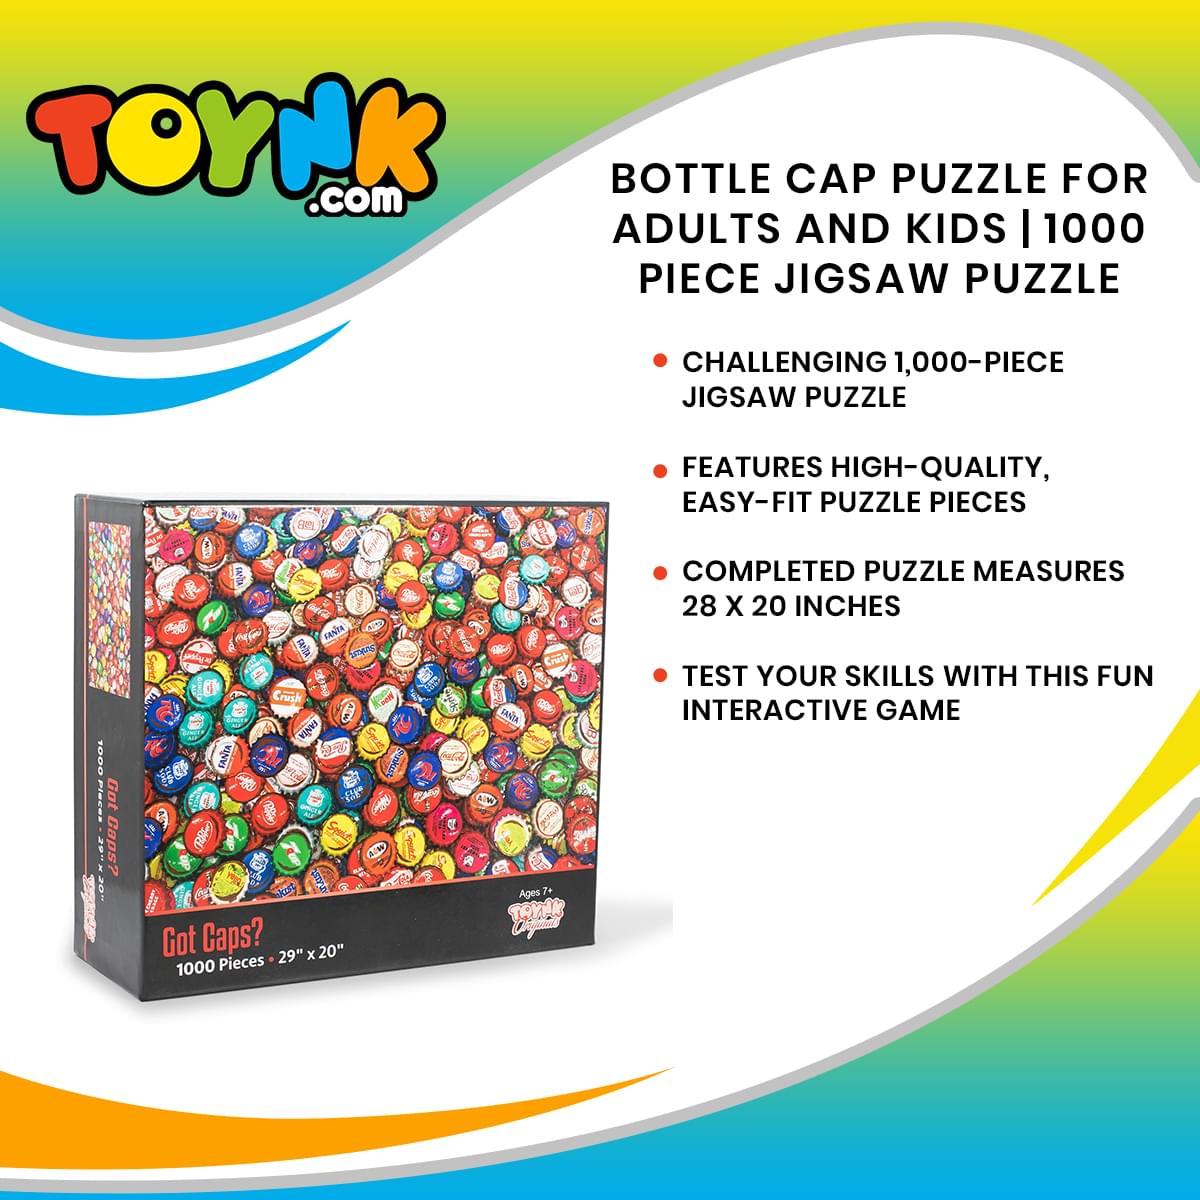 Got Caps? Soda Bottle Cap Puzzle For Adults And Kids | 1000 Piece Jigsaw Puzzle